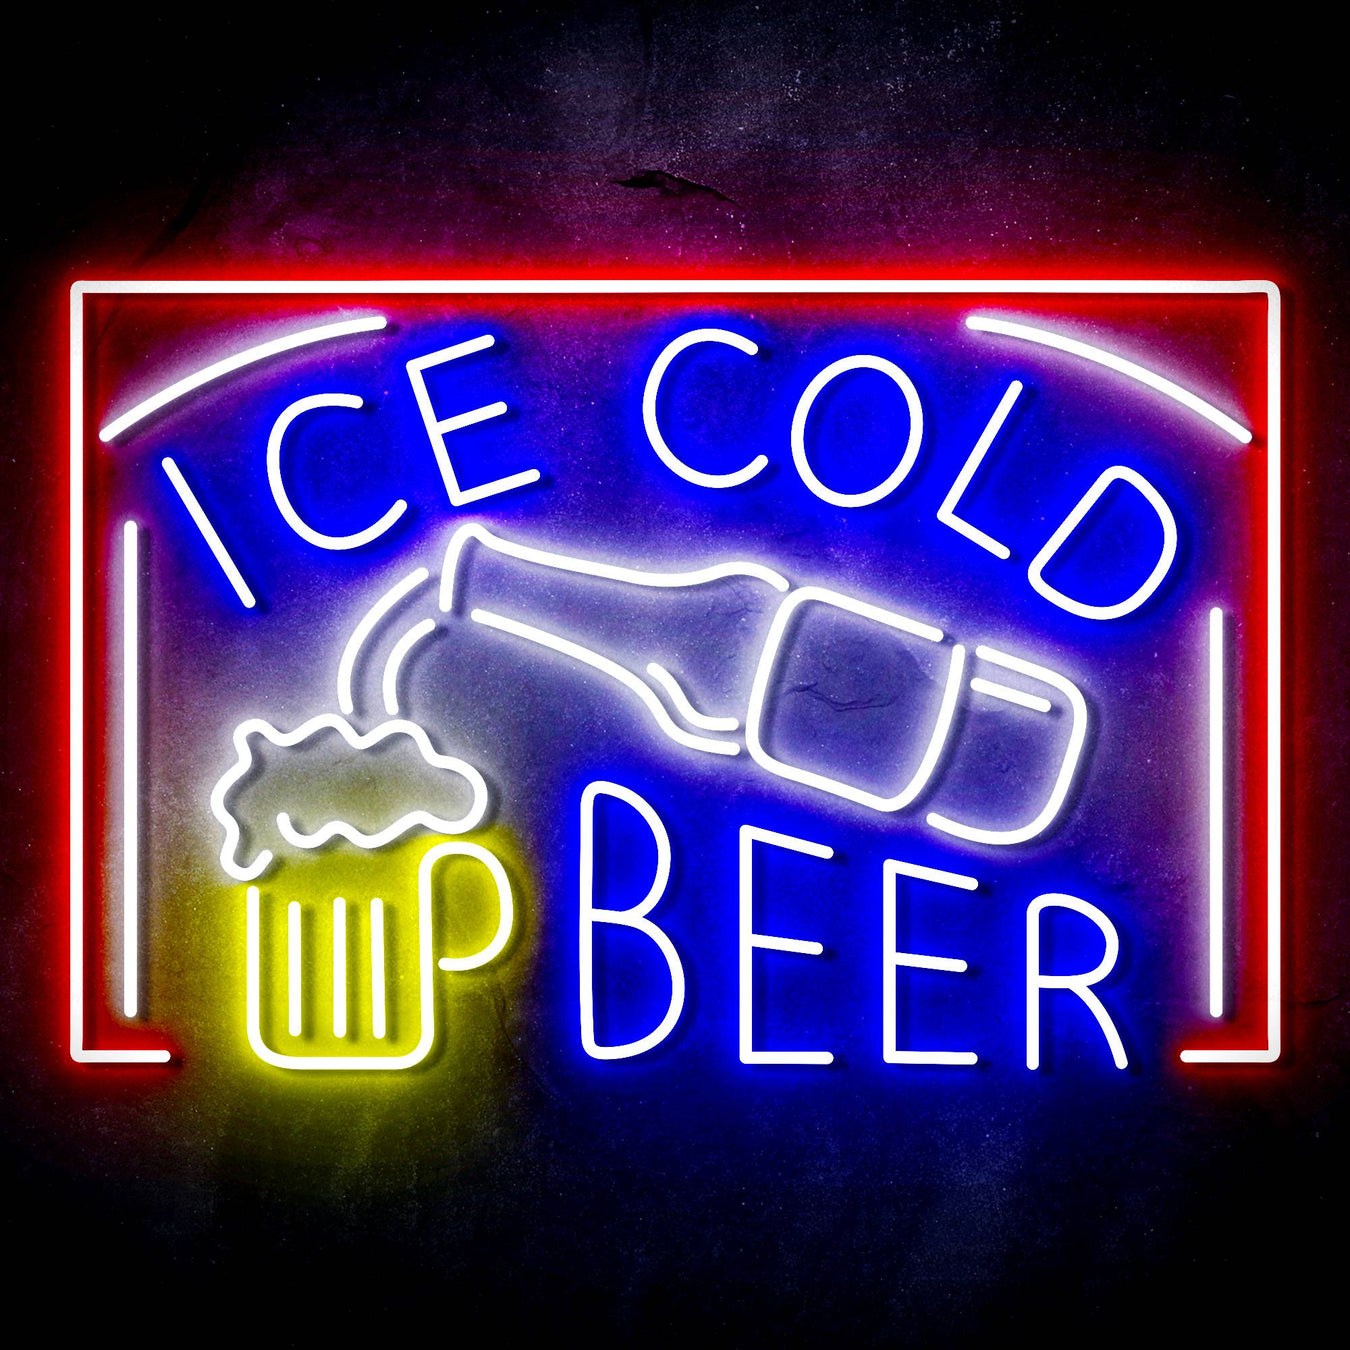 Beer & Bar Ultra-Bright LED Neon Signs